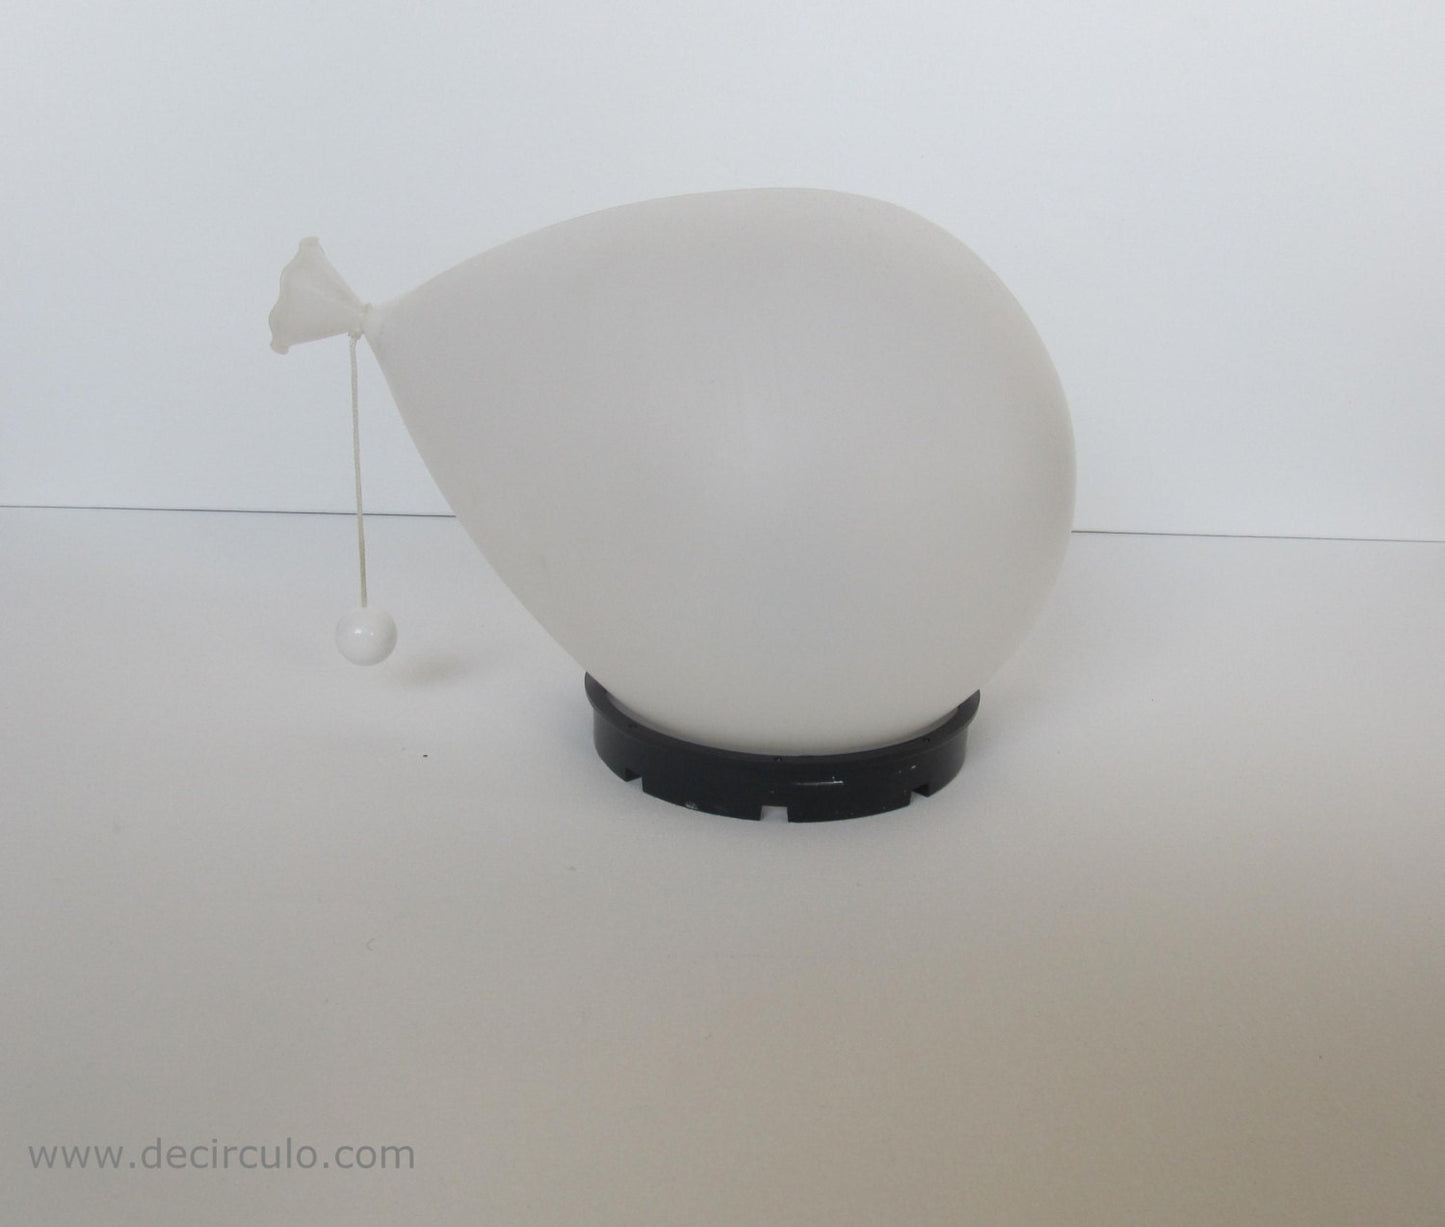 Table or wall balloon lamp designed by Yves Christin, smallest version white